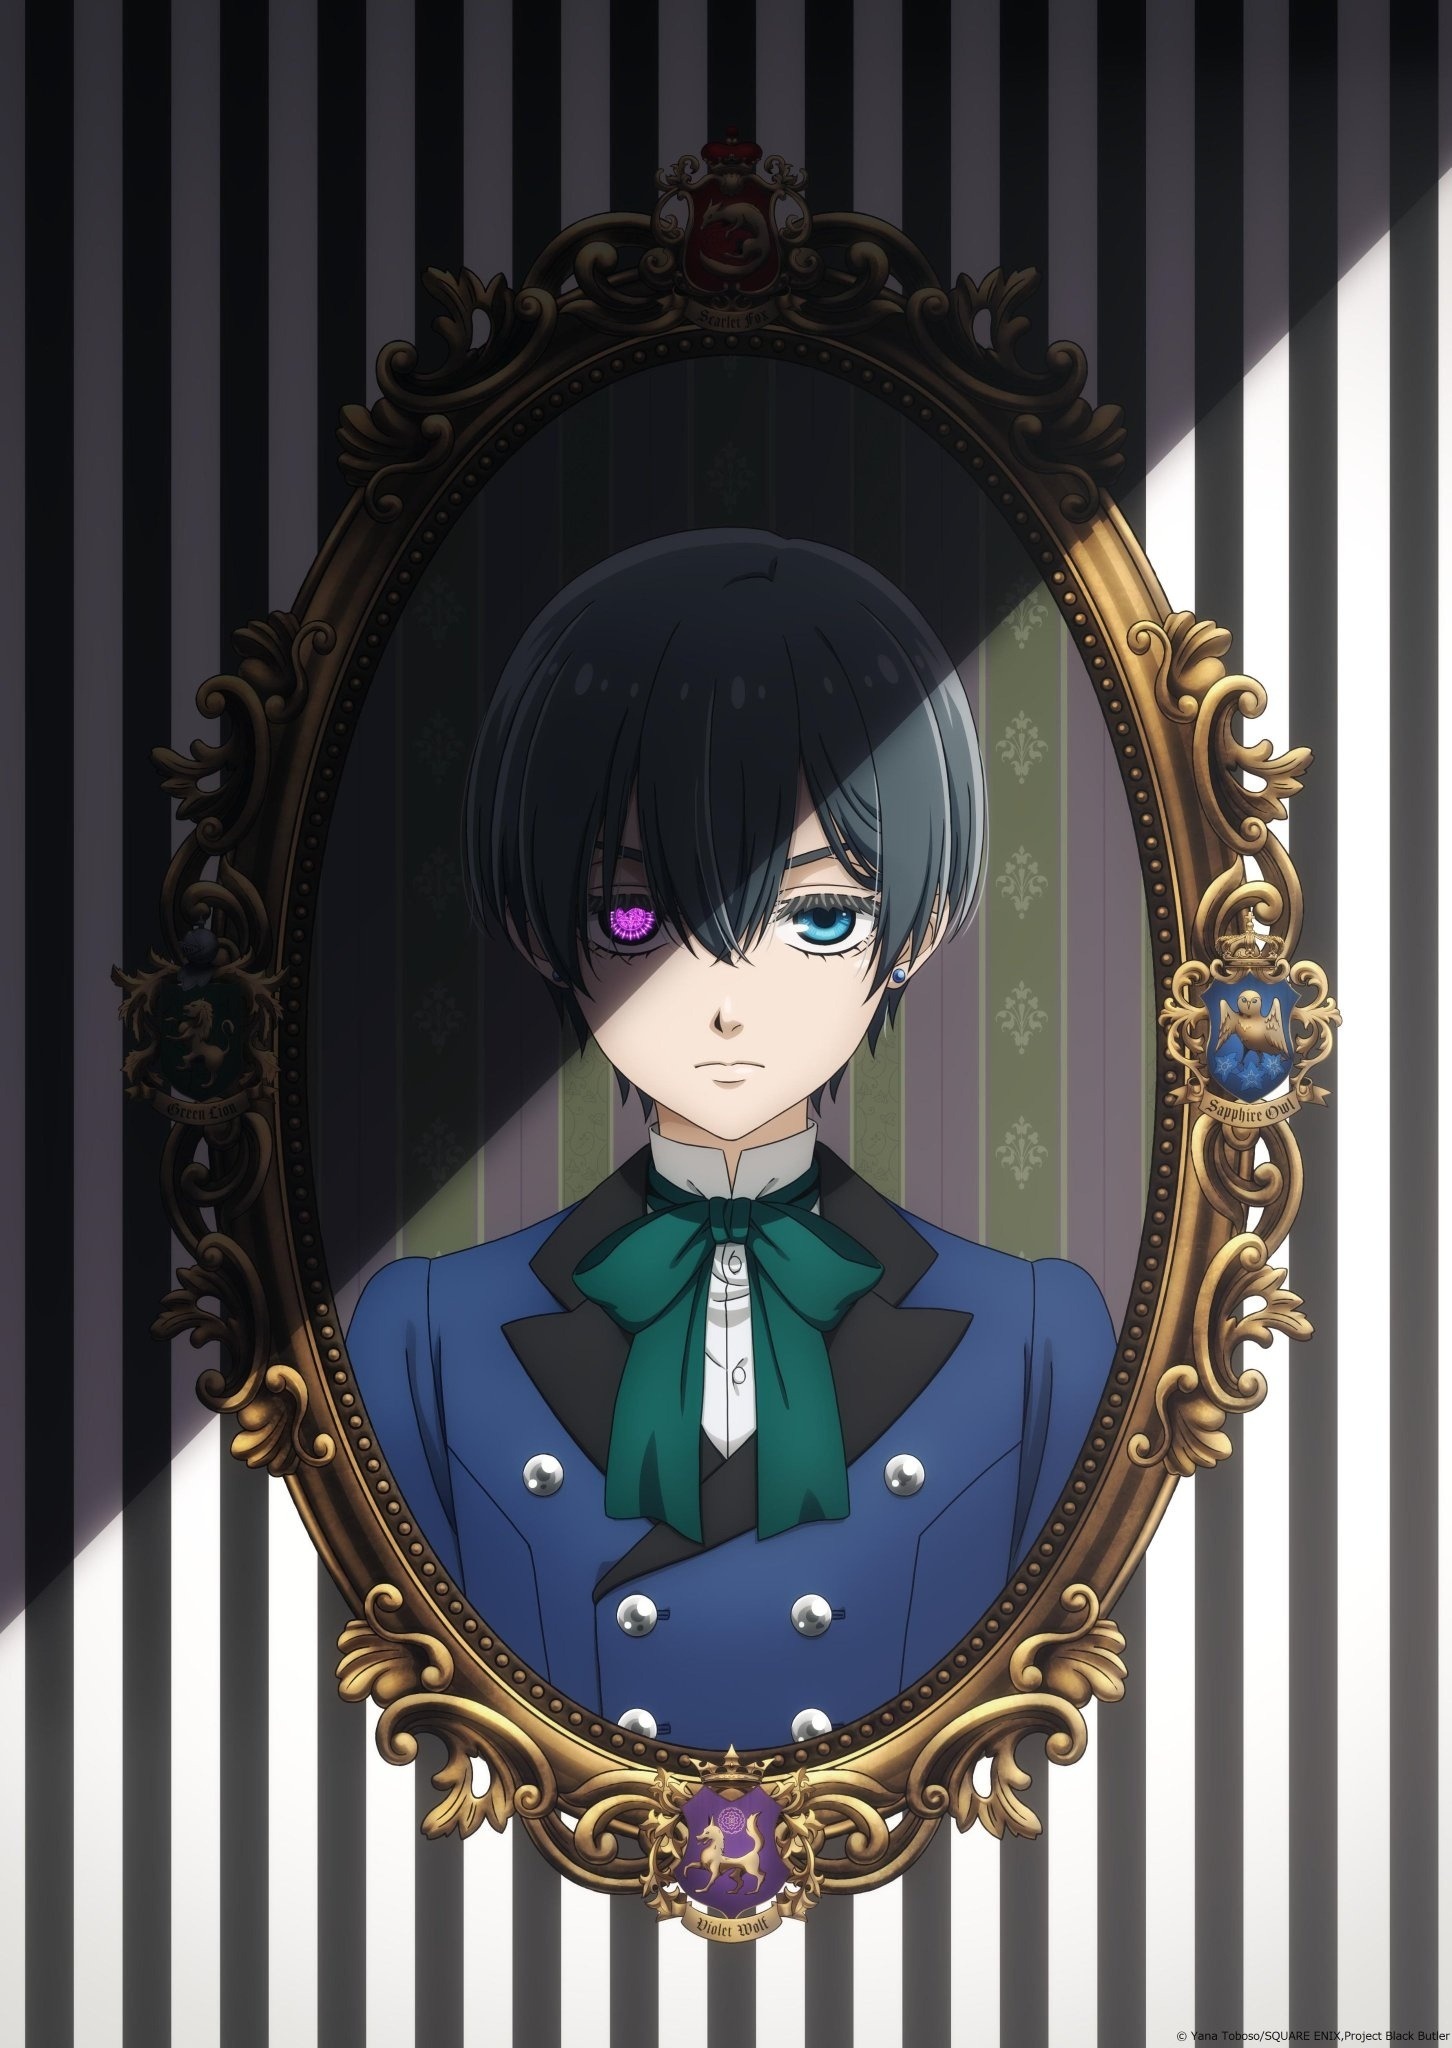 How Many Seasons of 'Black Butler' Are There and Will There Be Any More?